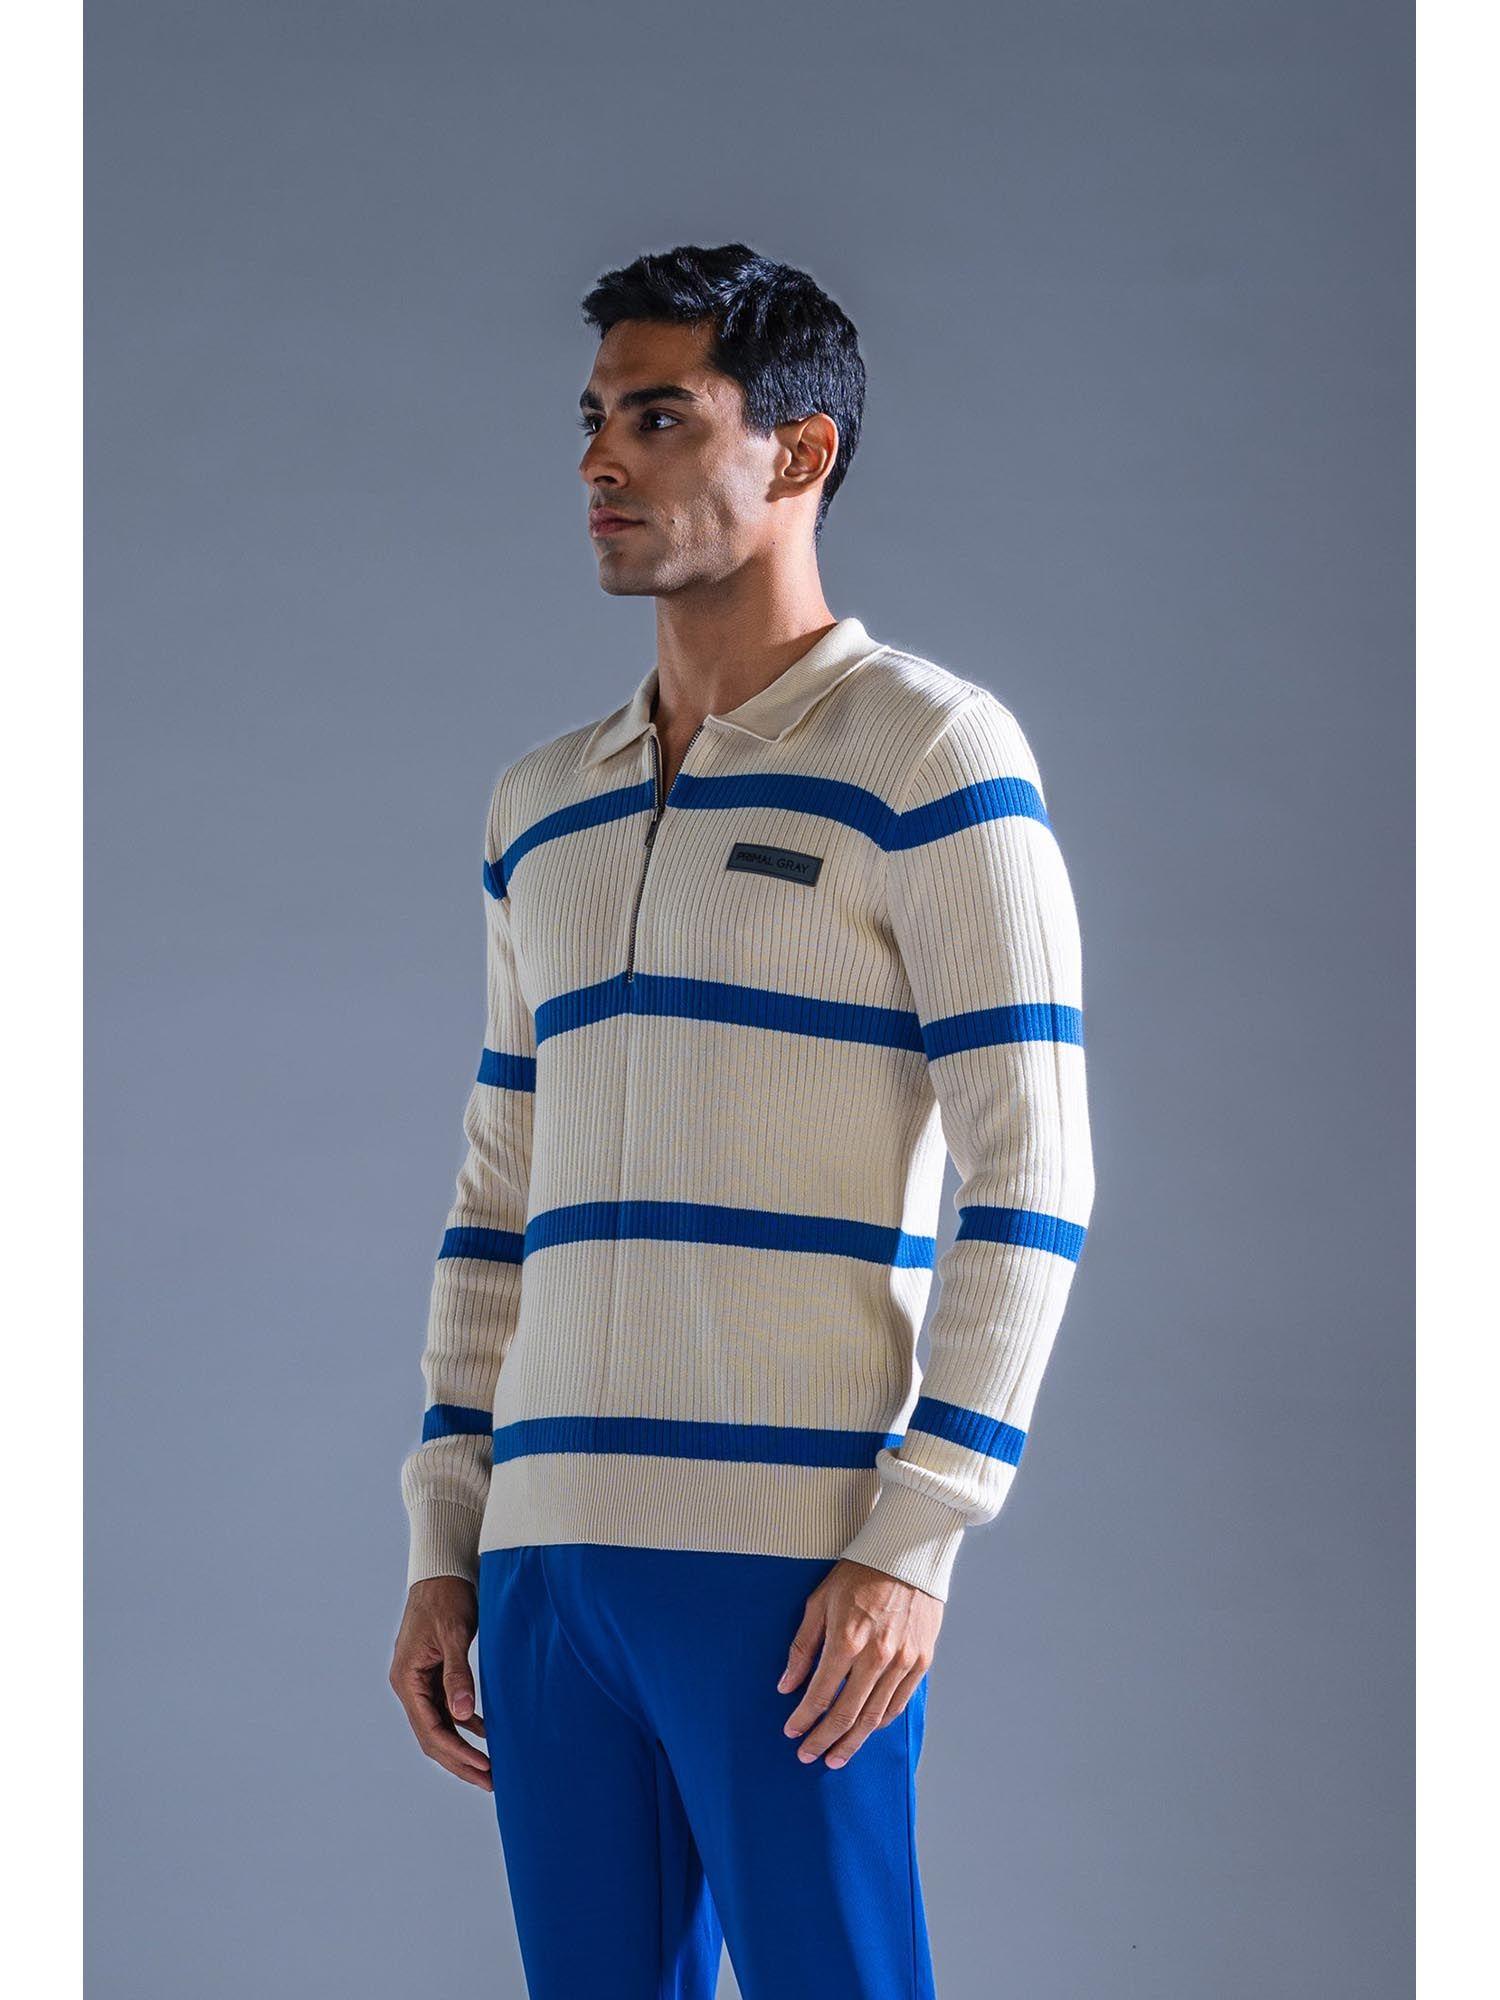 cream & cobalt blue cotton knit sweater polo neck pull over